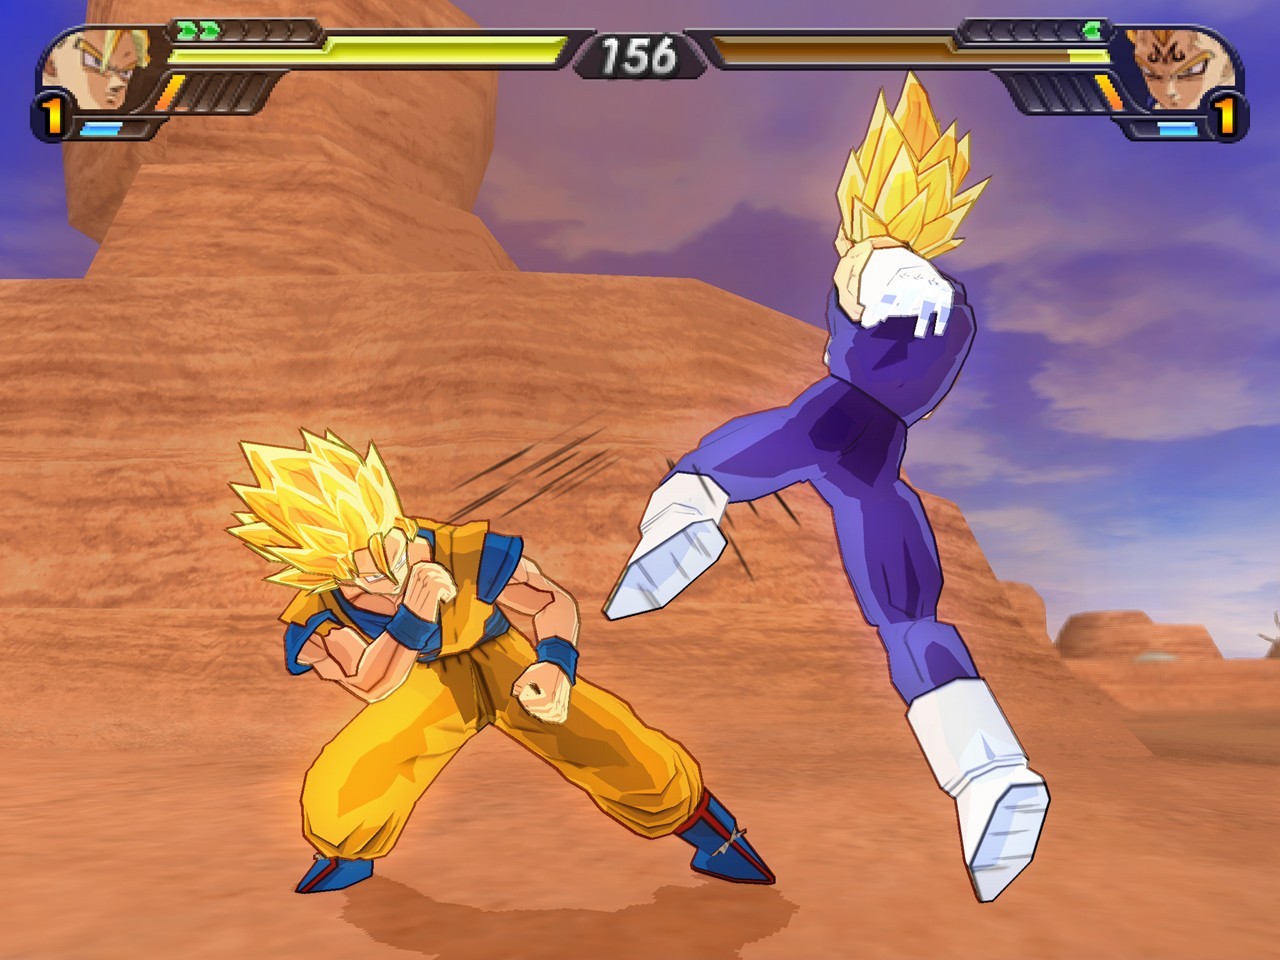 Dragon ball z ppsspp games free download for pc